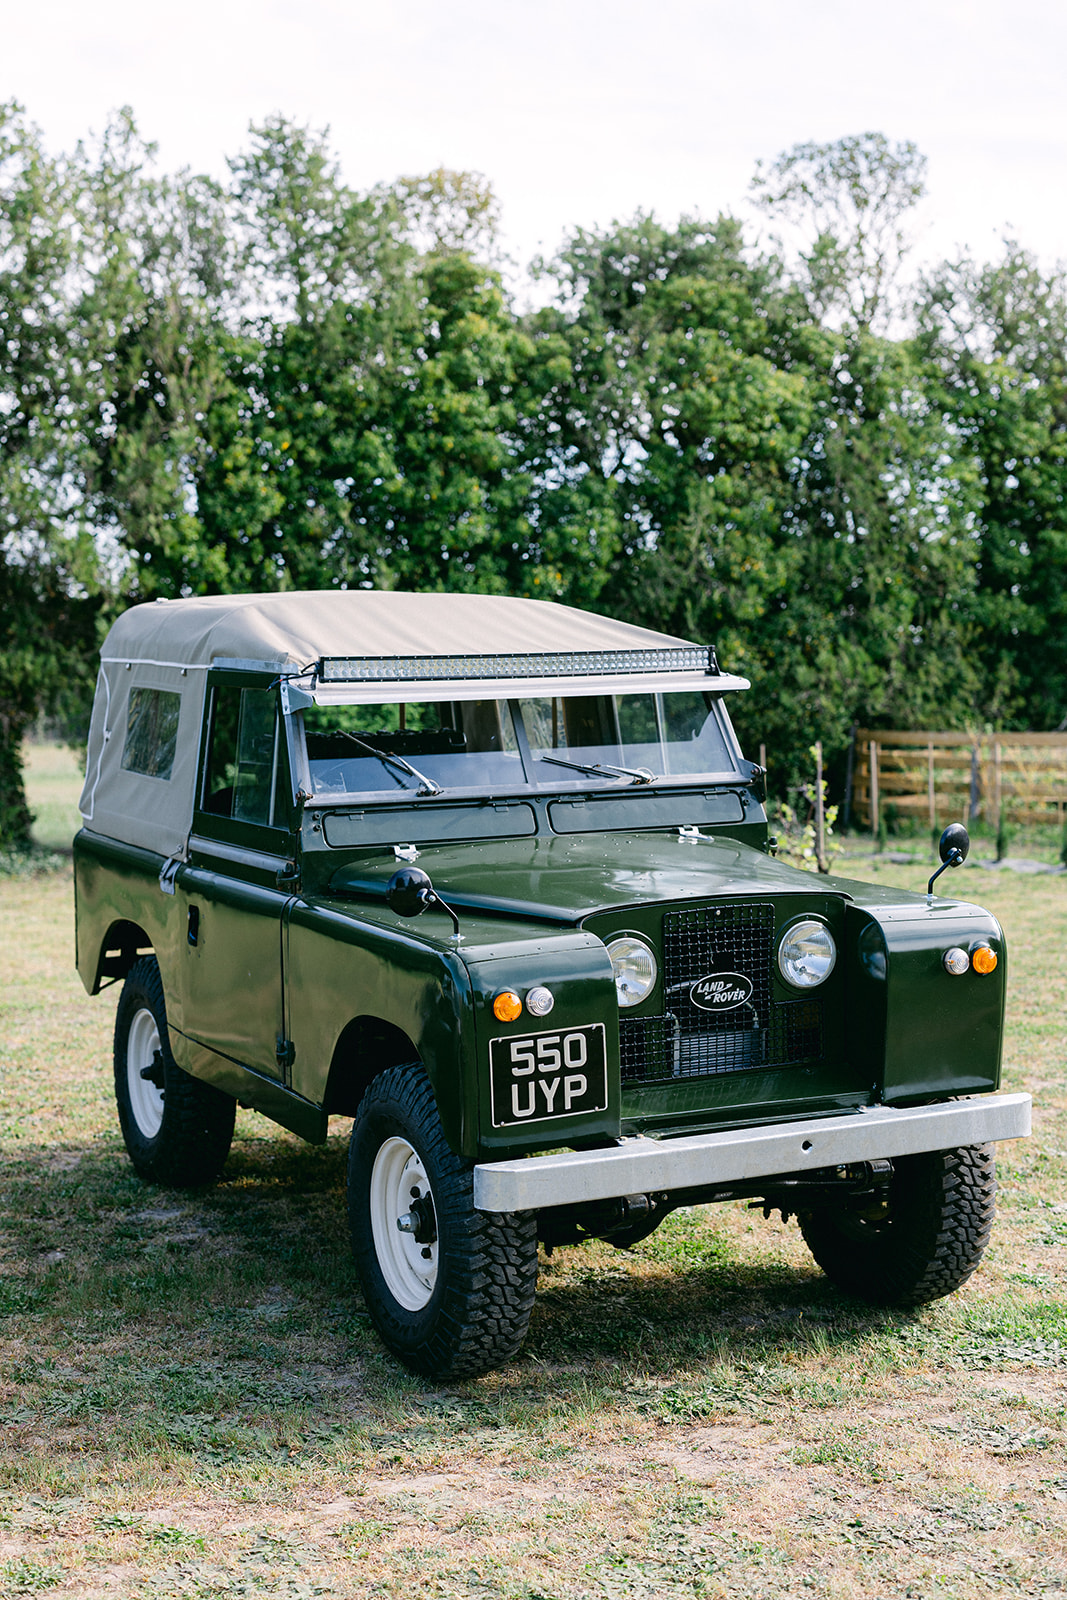 A view of the Provence Classics Land Rover Series 2